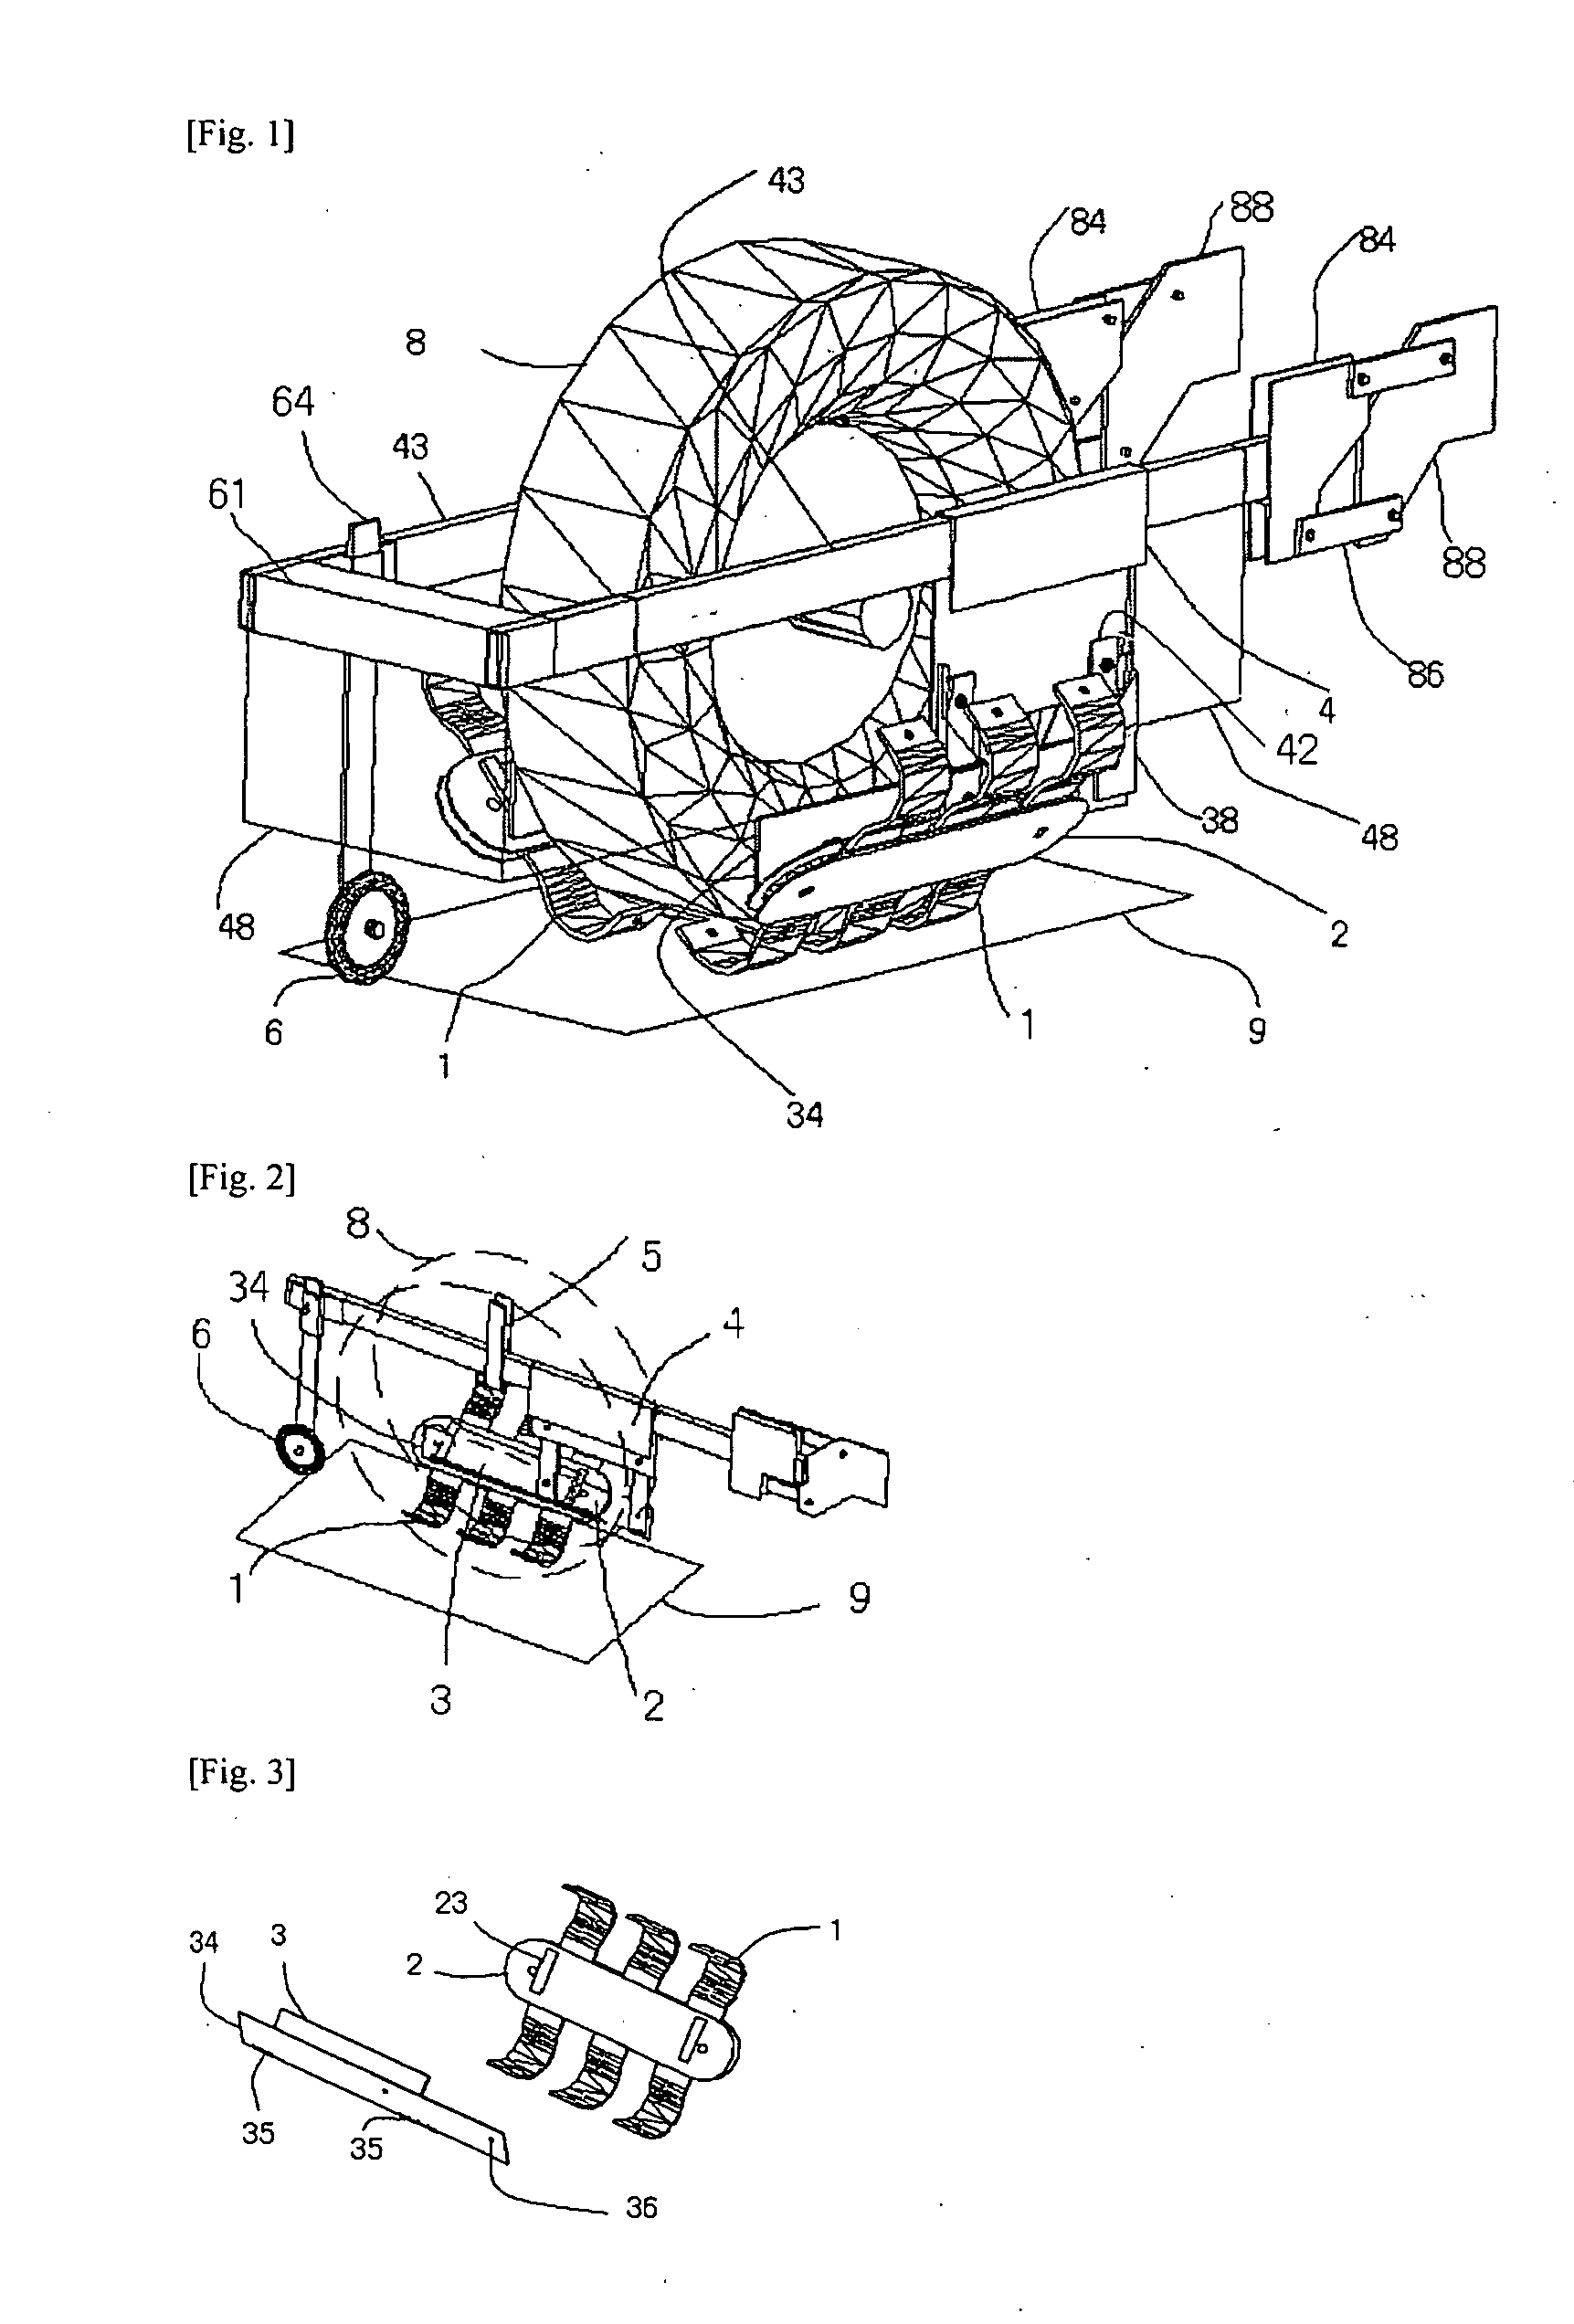 Control device for tread contact conditions of vehicles